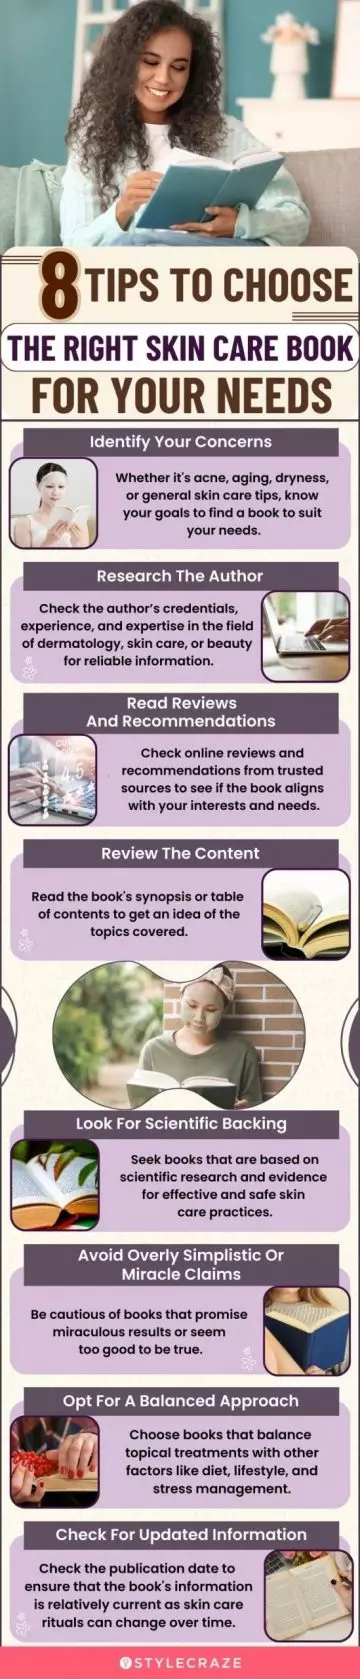 8 Tips To Choose The Right Skin Care Book For Your Needs (infographic)